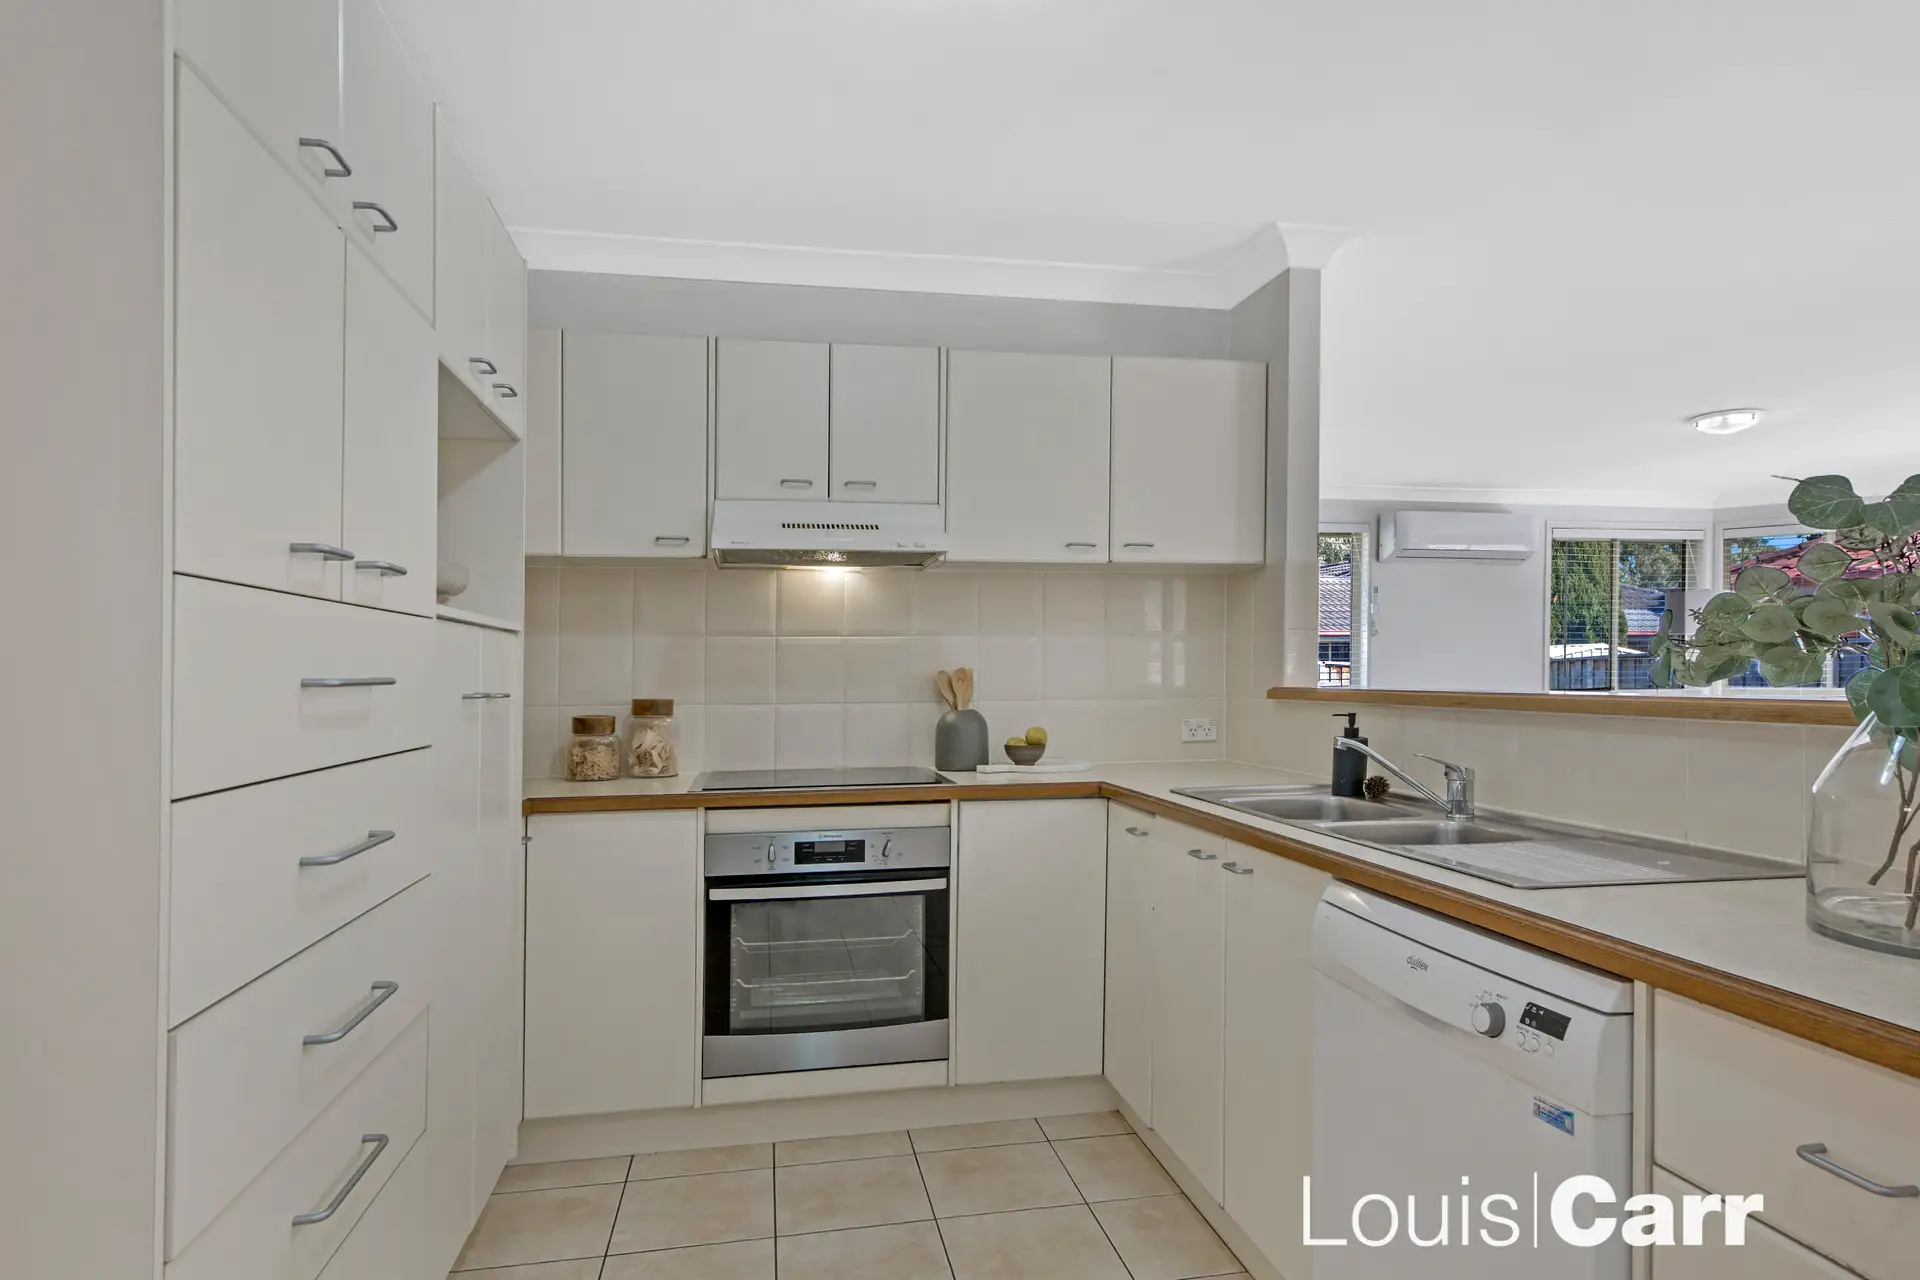 Photo #7: 30 Macquarie Avenue, Kellyville - Sold by Louis Carr Real Estate